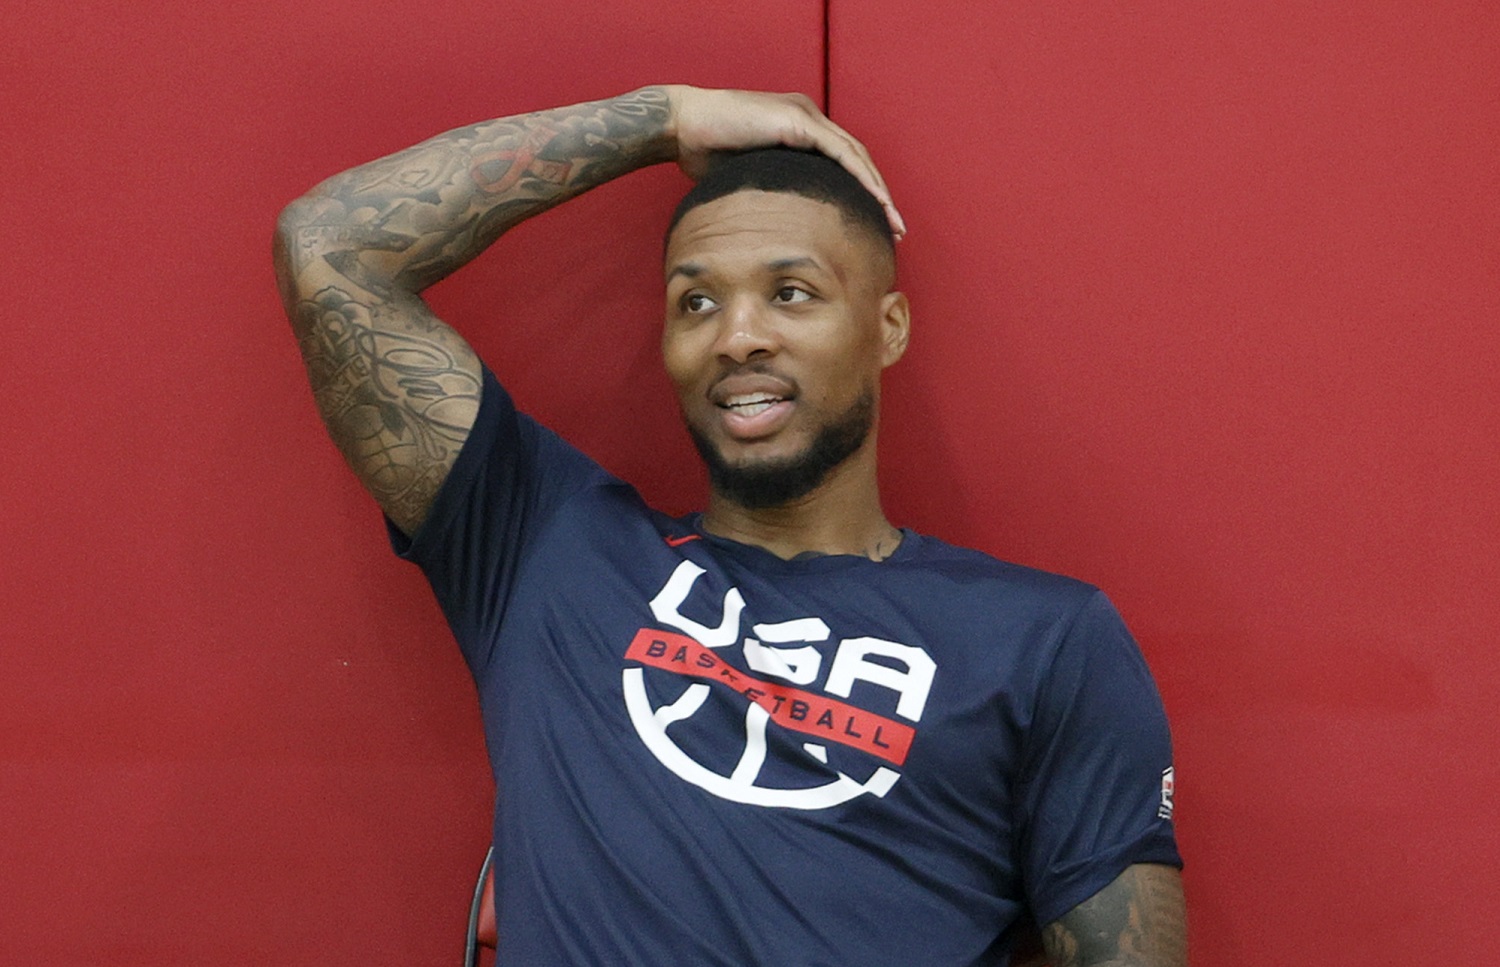 Damian Lillard of the 2021 USA Basketball Men's National Team rests after a practice at UNLV as the team gets ready for the Tokyo Olympics| Ethan Miller/Getty Images